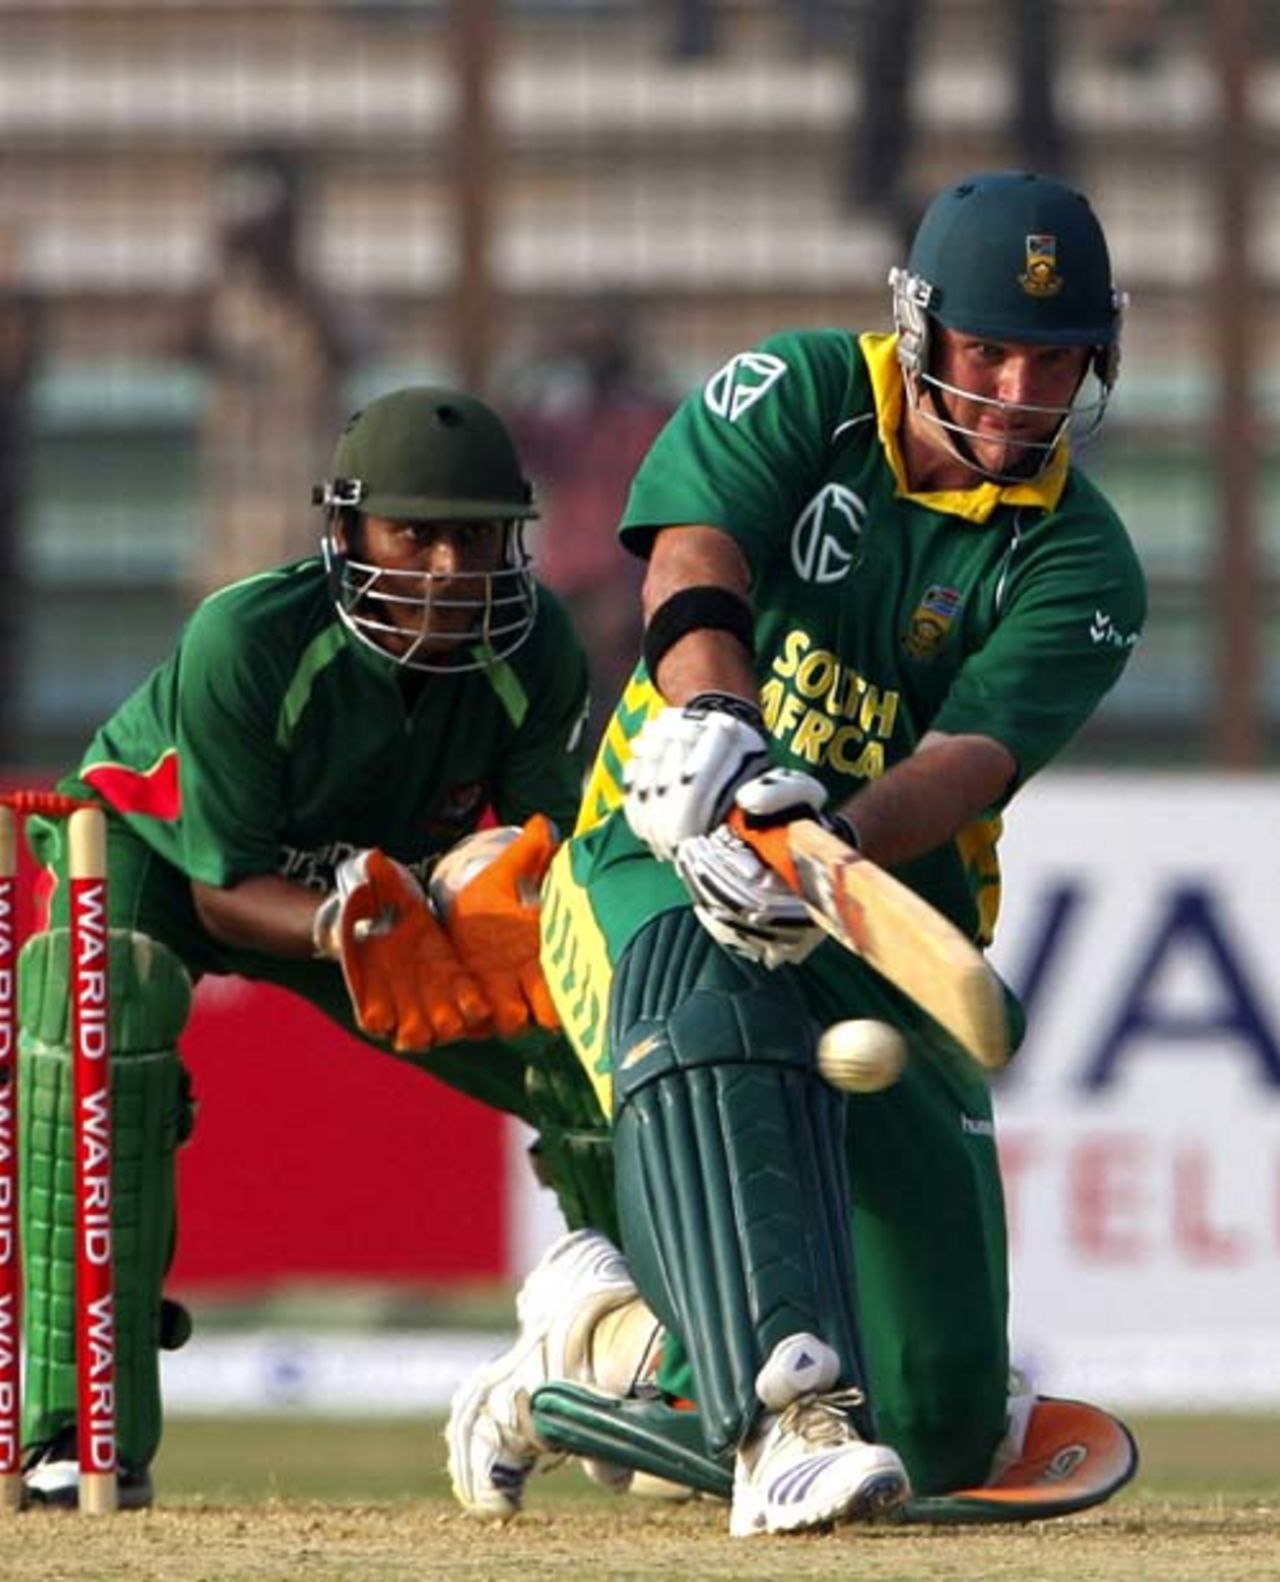 Graeme Smith attempts the sweep shot as Dhiman Ghosh looks on, Bangladesh v South Africa, 1st ODI, Chittagong, March 9, 2008